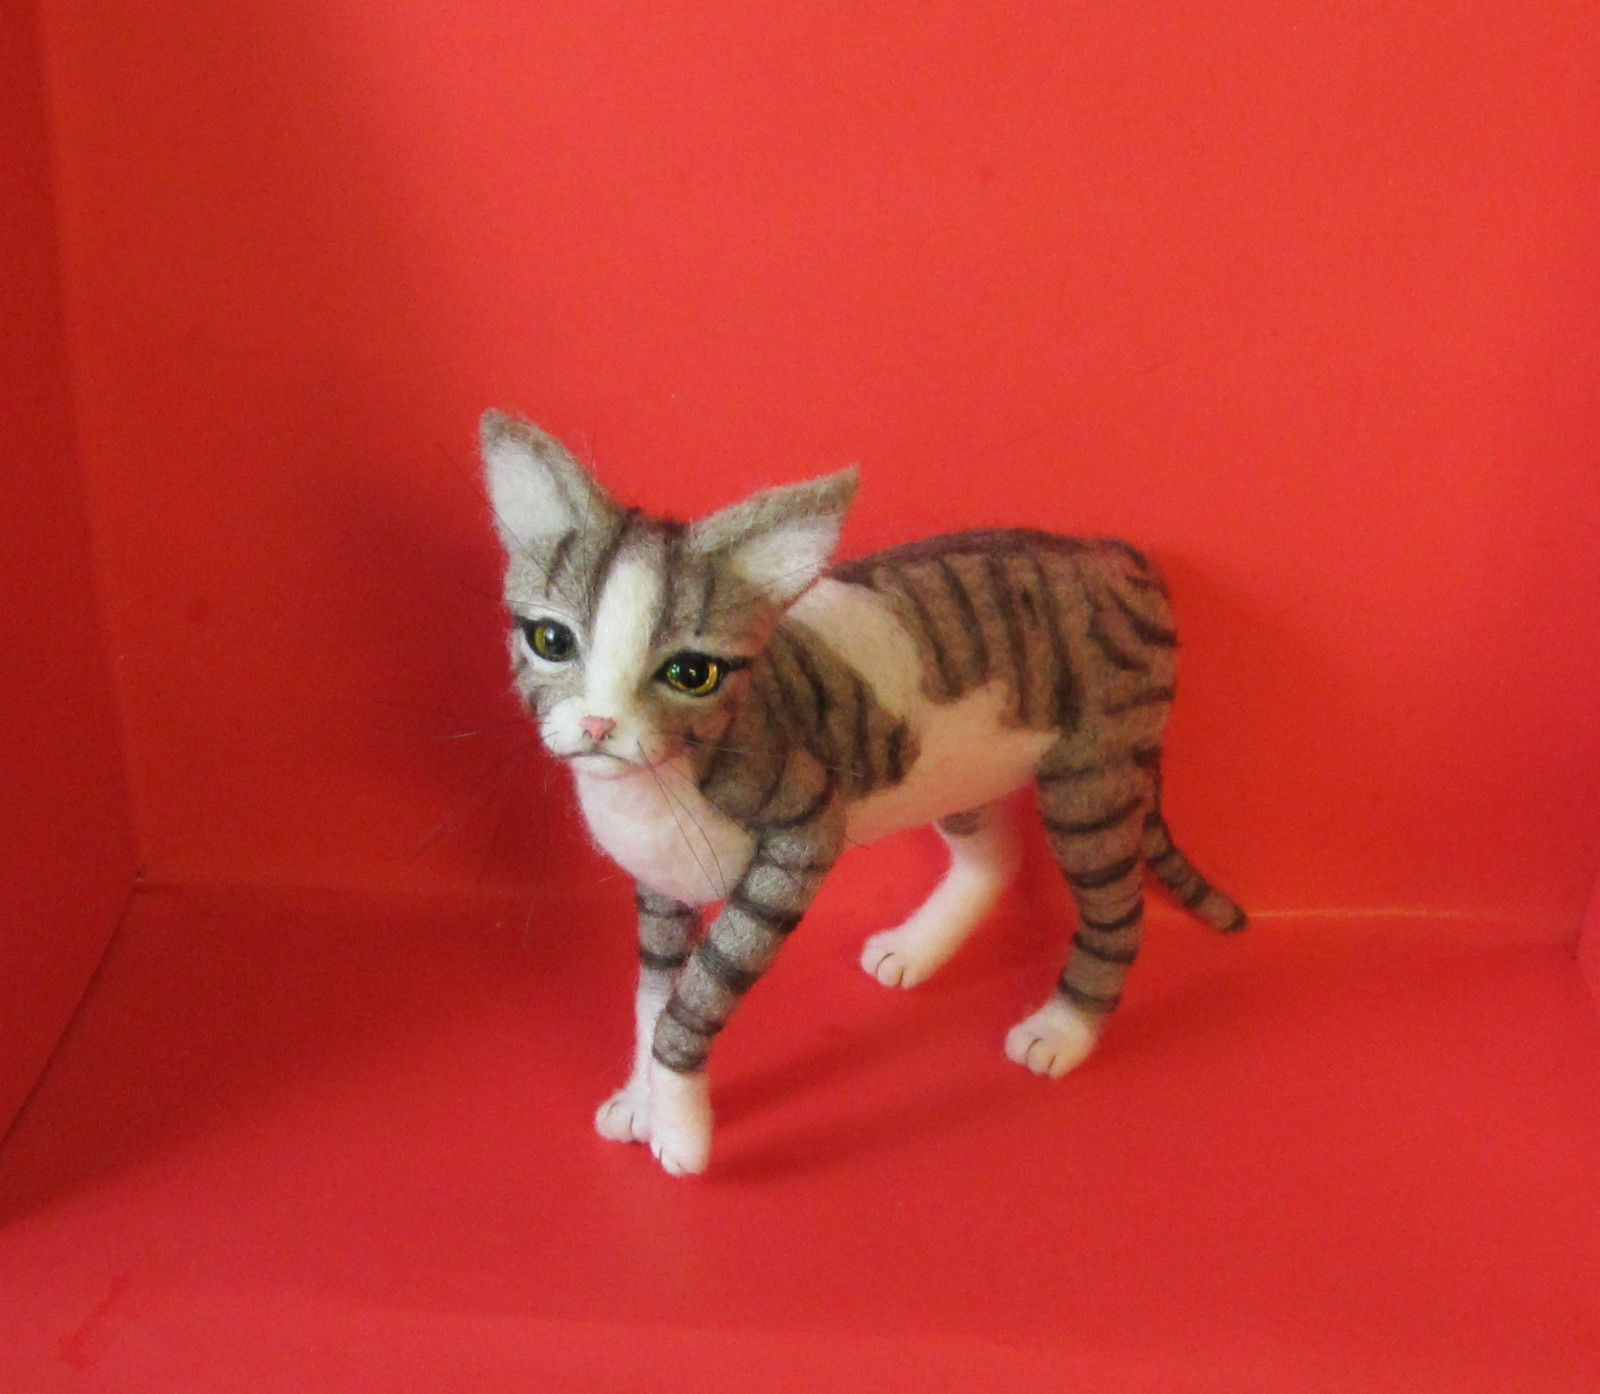 OOAK ADSG NEEDLE FELTED CAT, DOG, ANIMAL, OR PORTRAIT OF YOUR PET  MINIATURE  